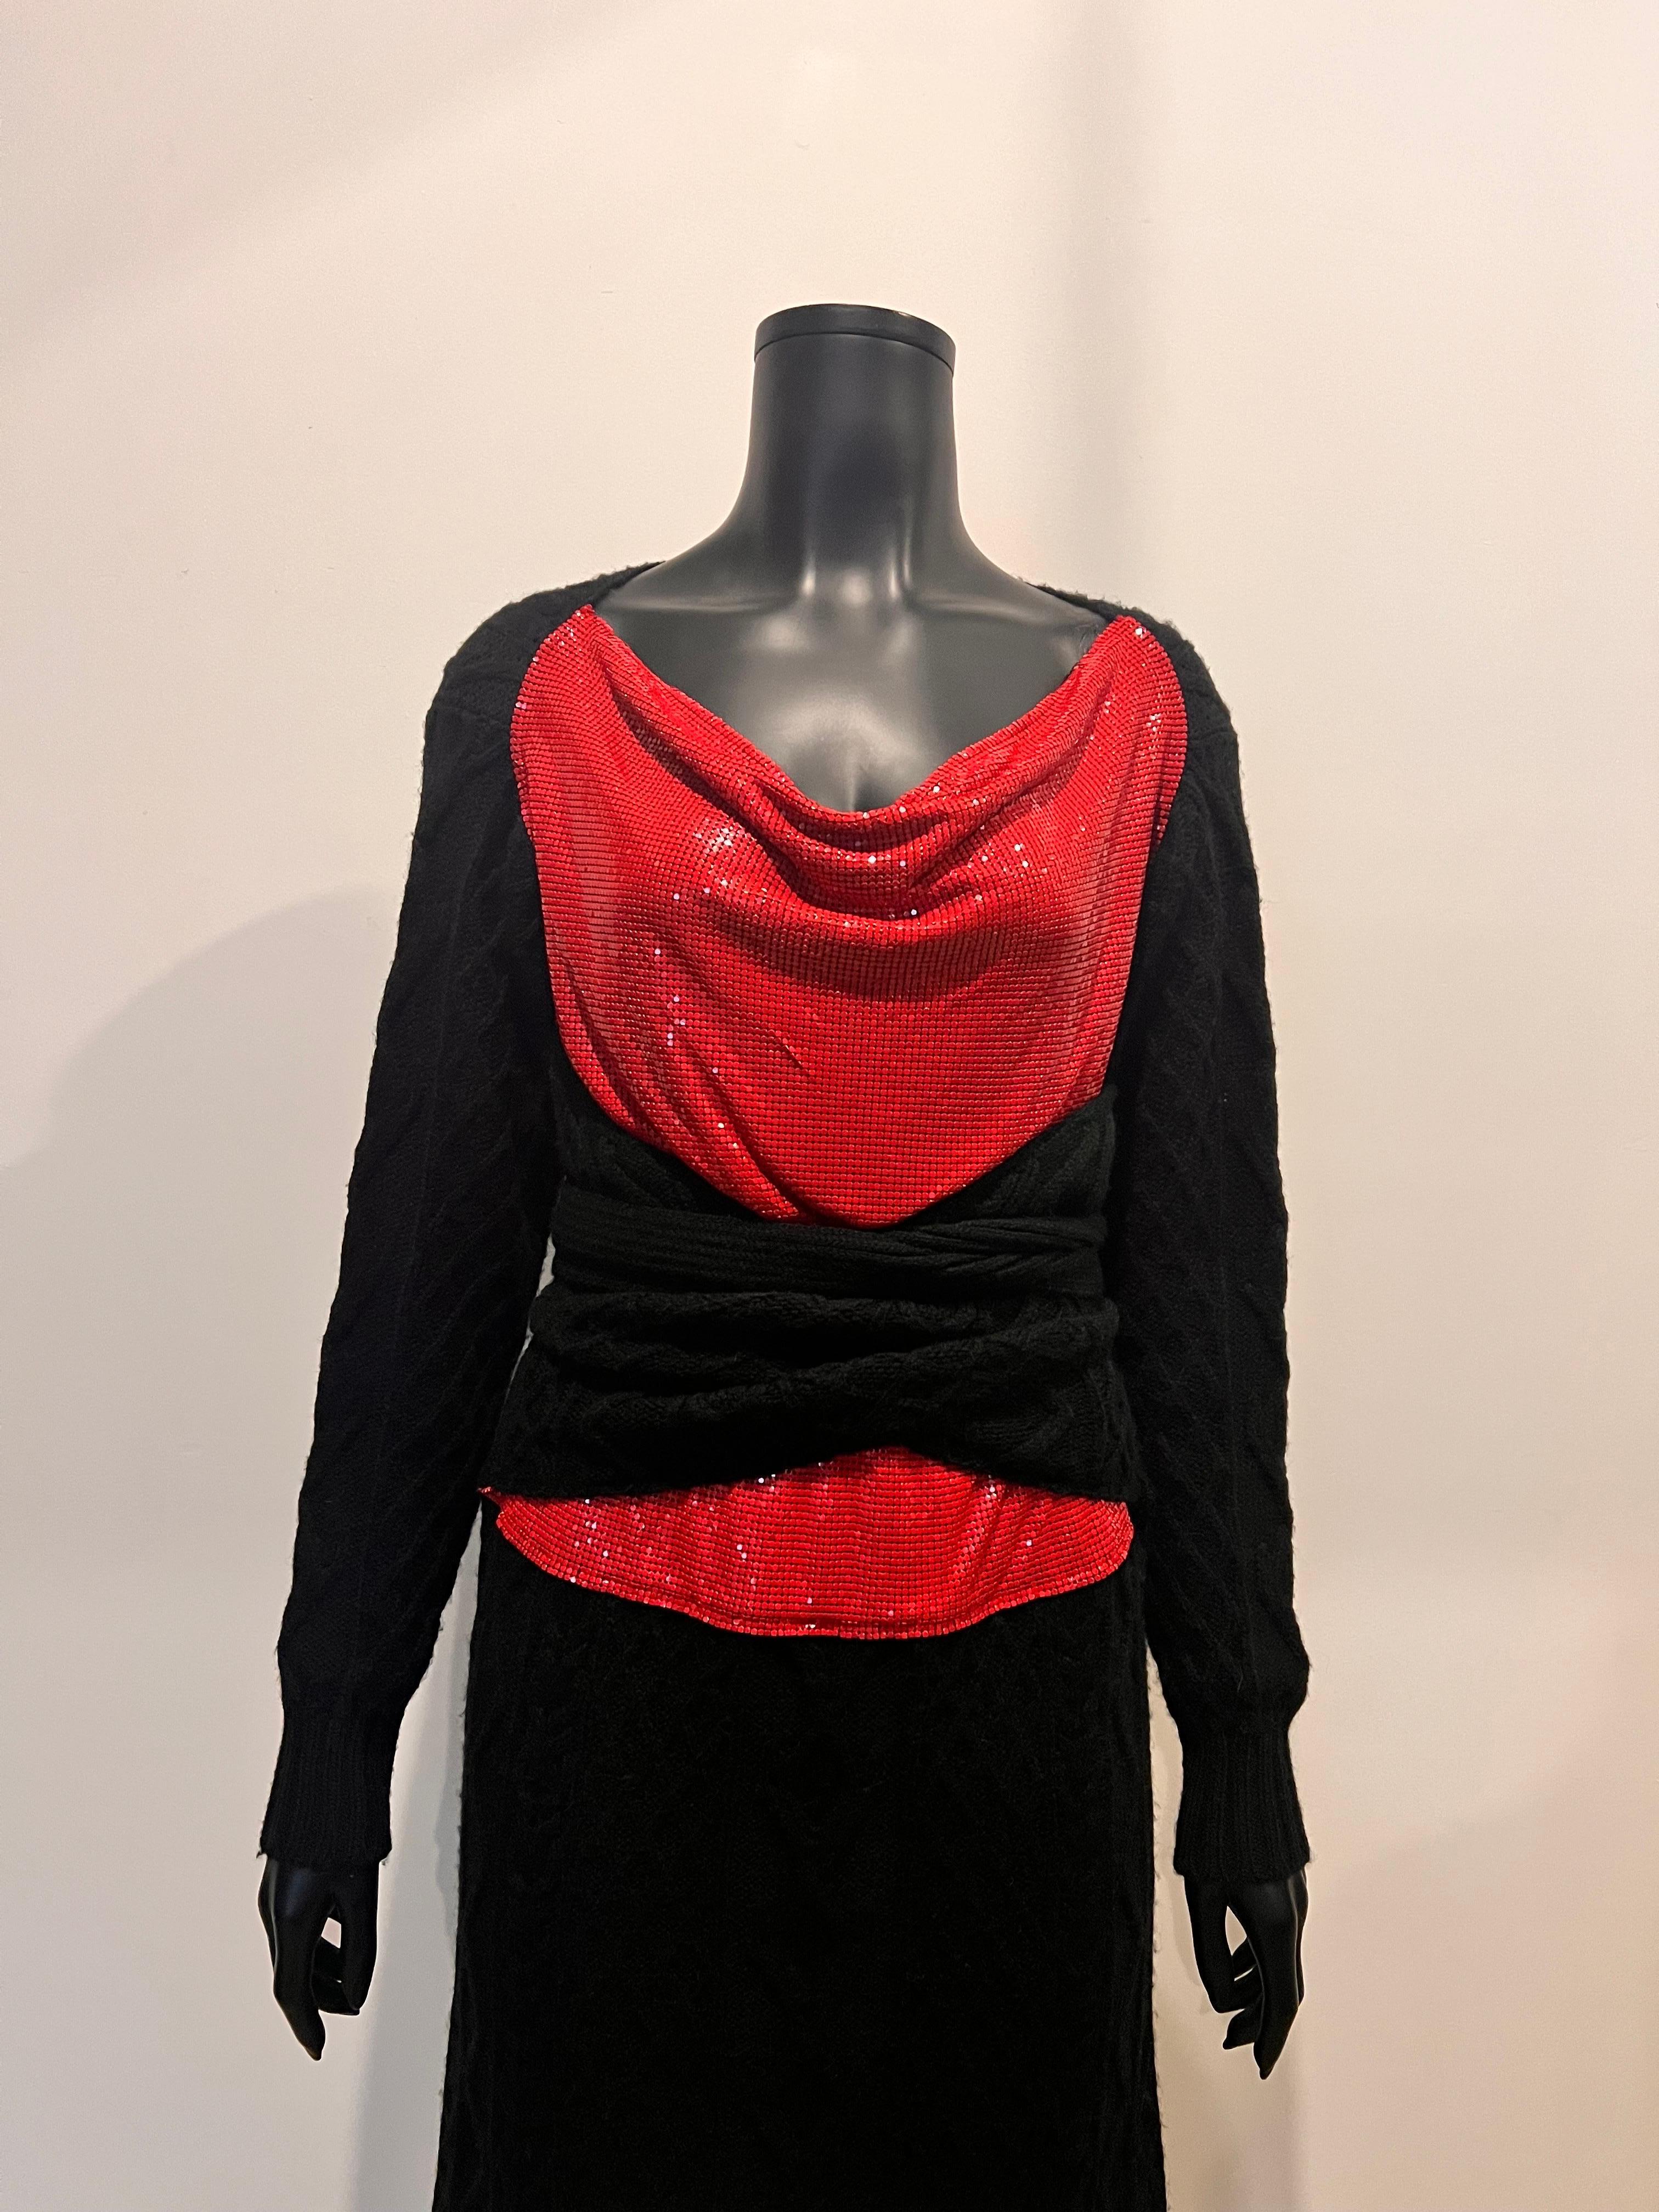 This incredibly unique piece of 1990's Jean Paul Gaultier Maille Femme is an unusual mix of cable knit and glomesh/metal micro sequin style. The dress has exceptionally long wrap ties in the cable knit fabric that wrap twice around the bodice